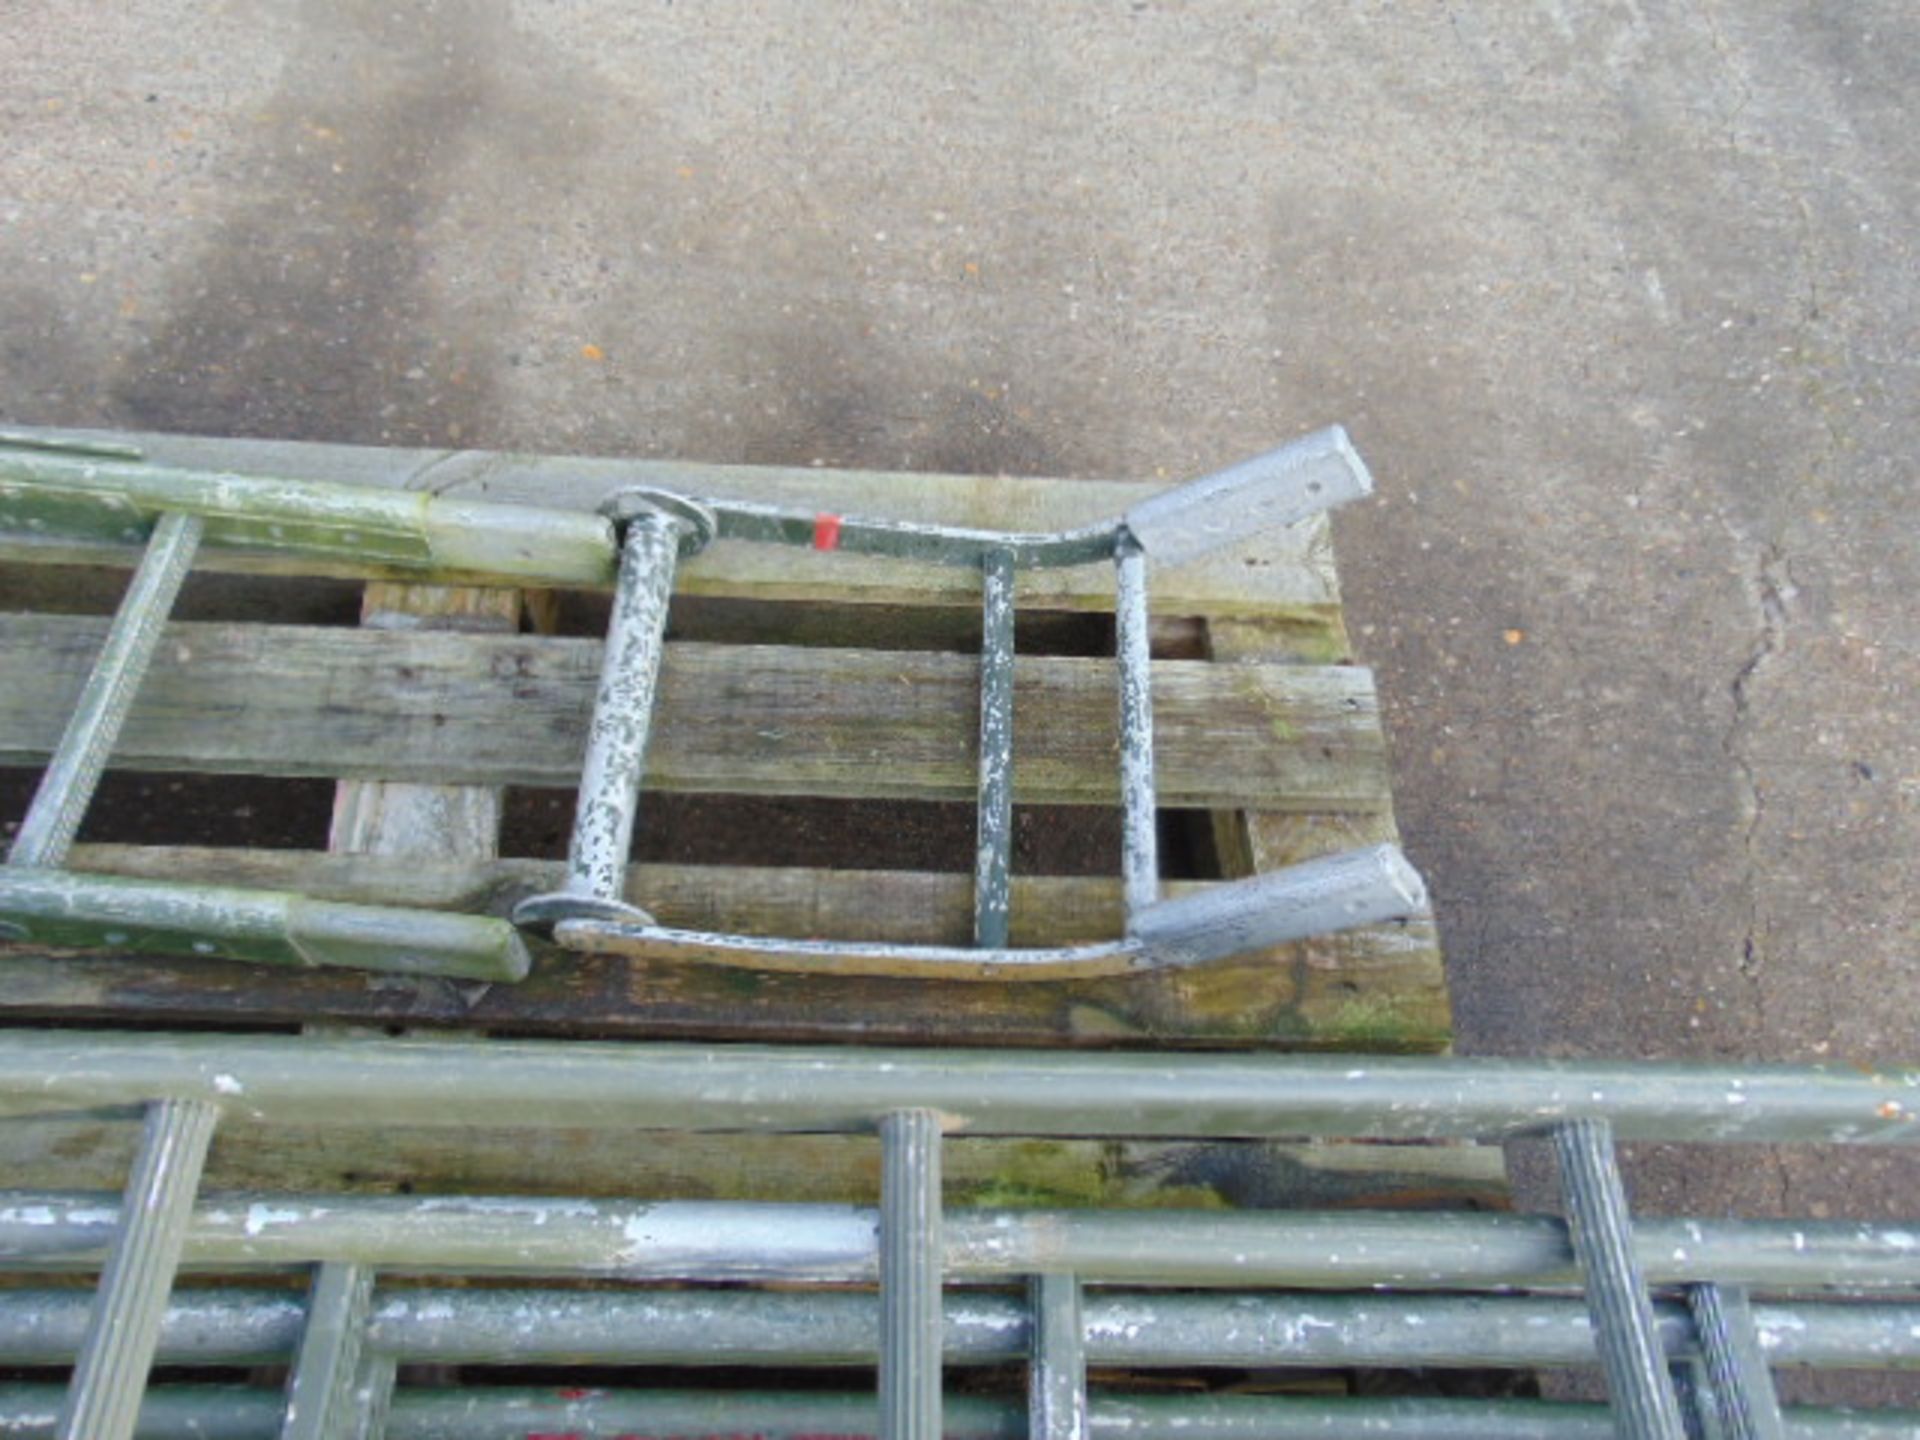 4 Section Military Aluminium Scaling/Assault Ladder with Ridge Hook and Roller Attachments - Image 3 of 4